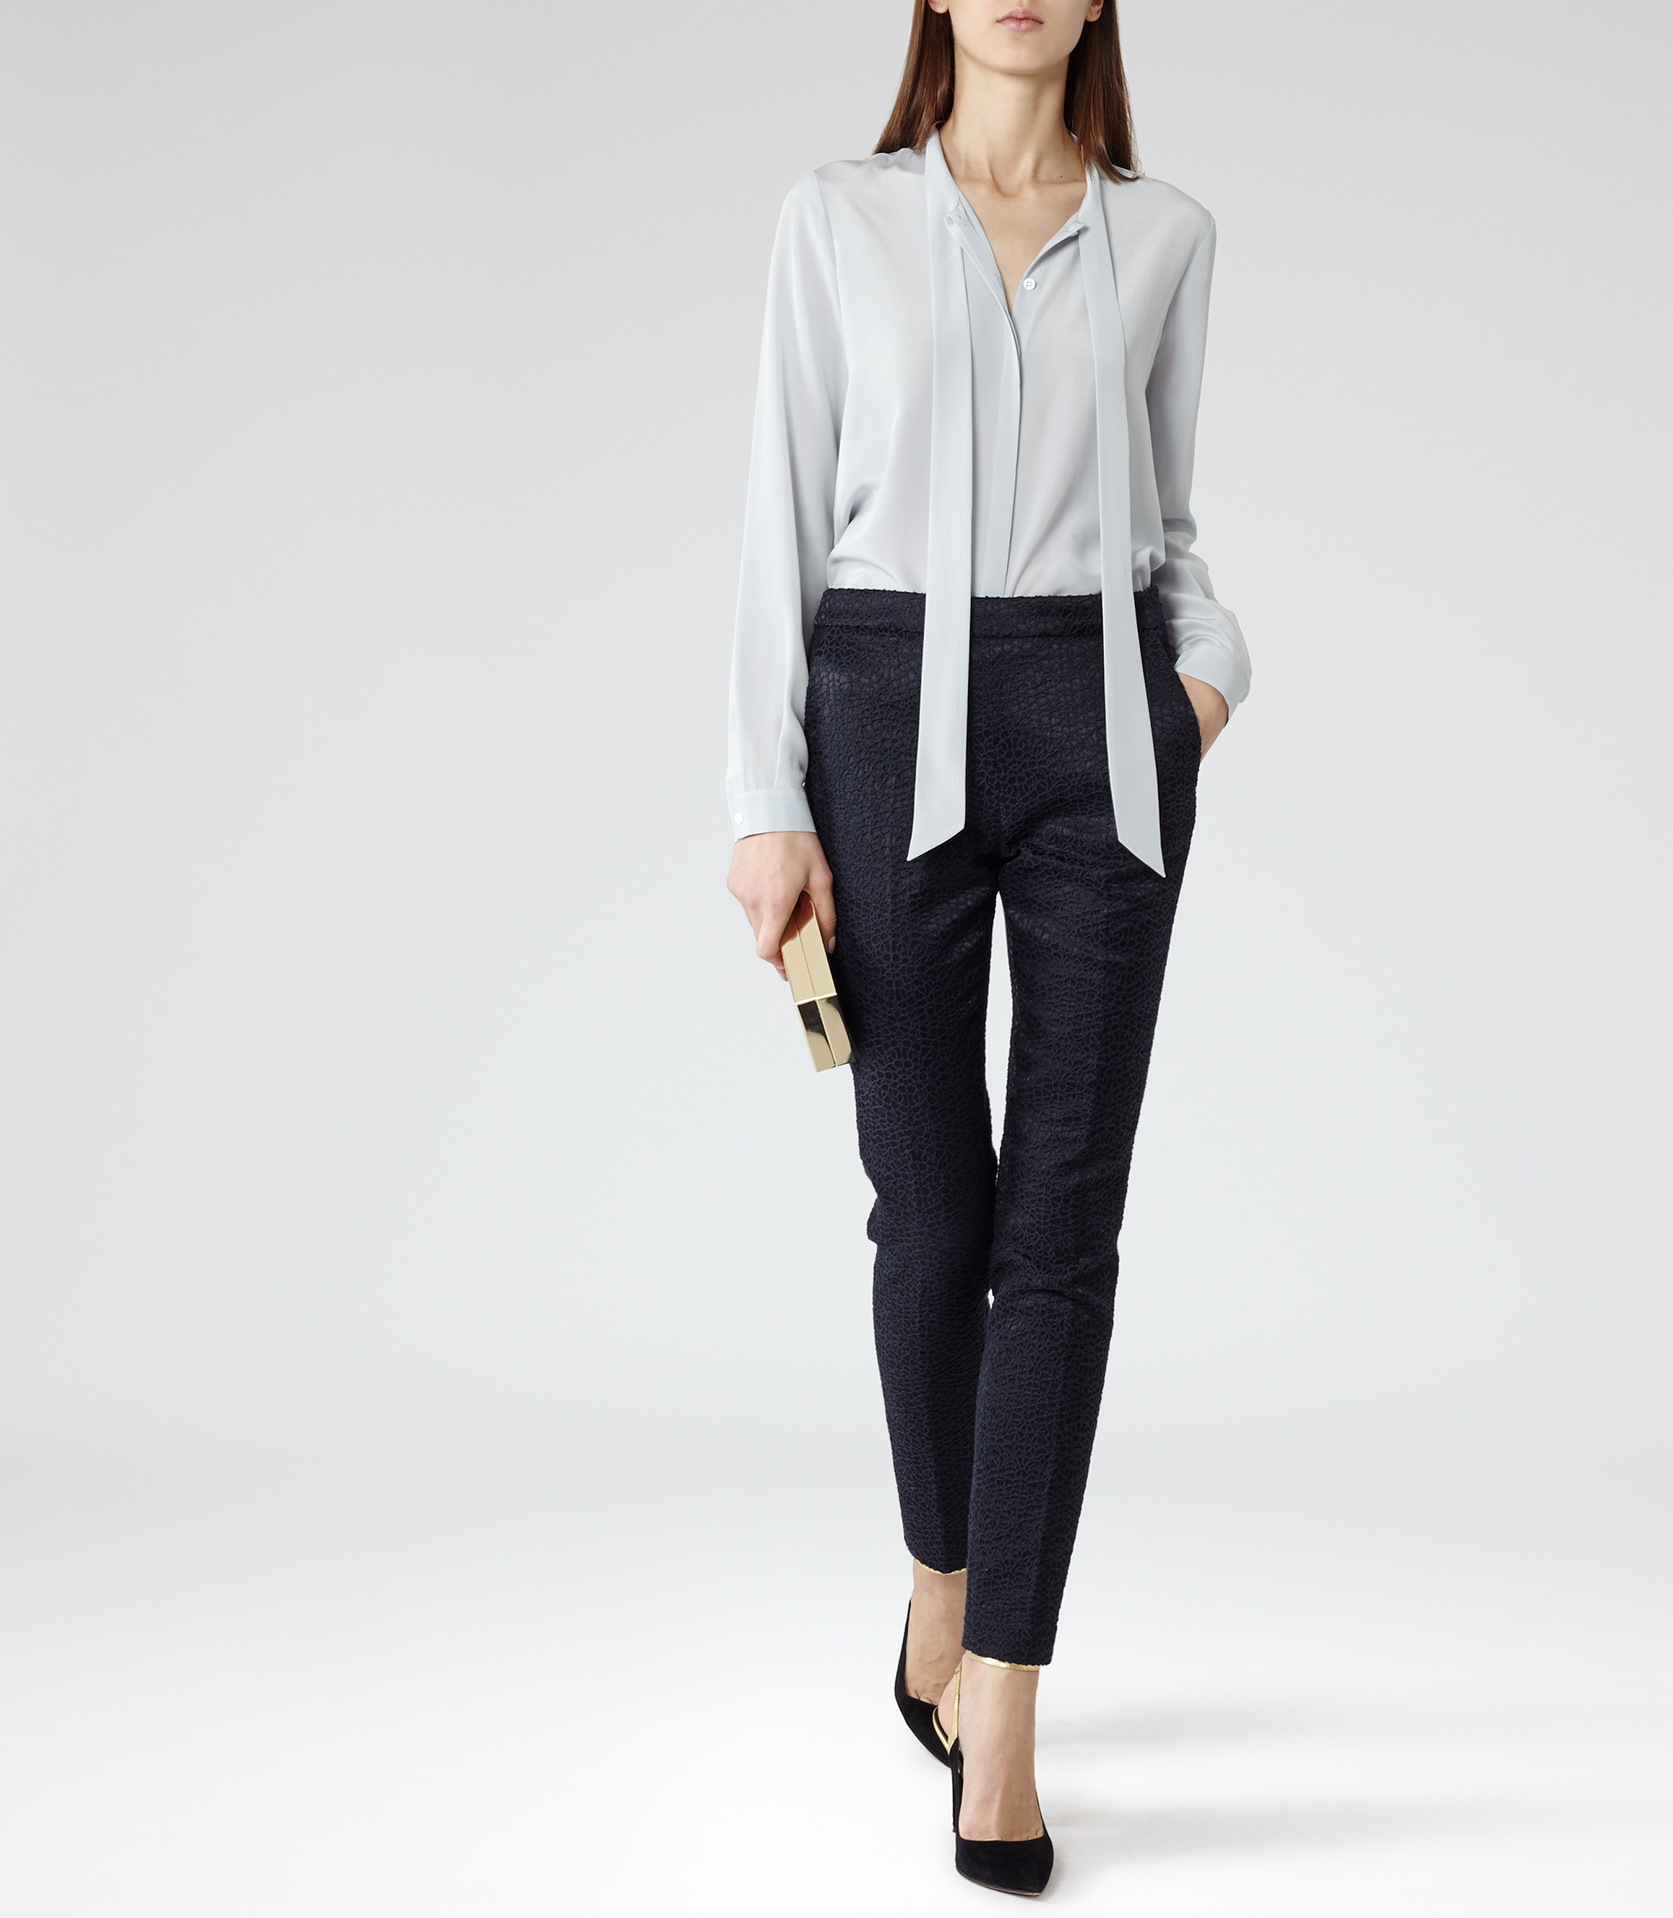 Lyst - Reiss Julie Pussy Bow Blouse in Blue